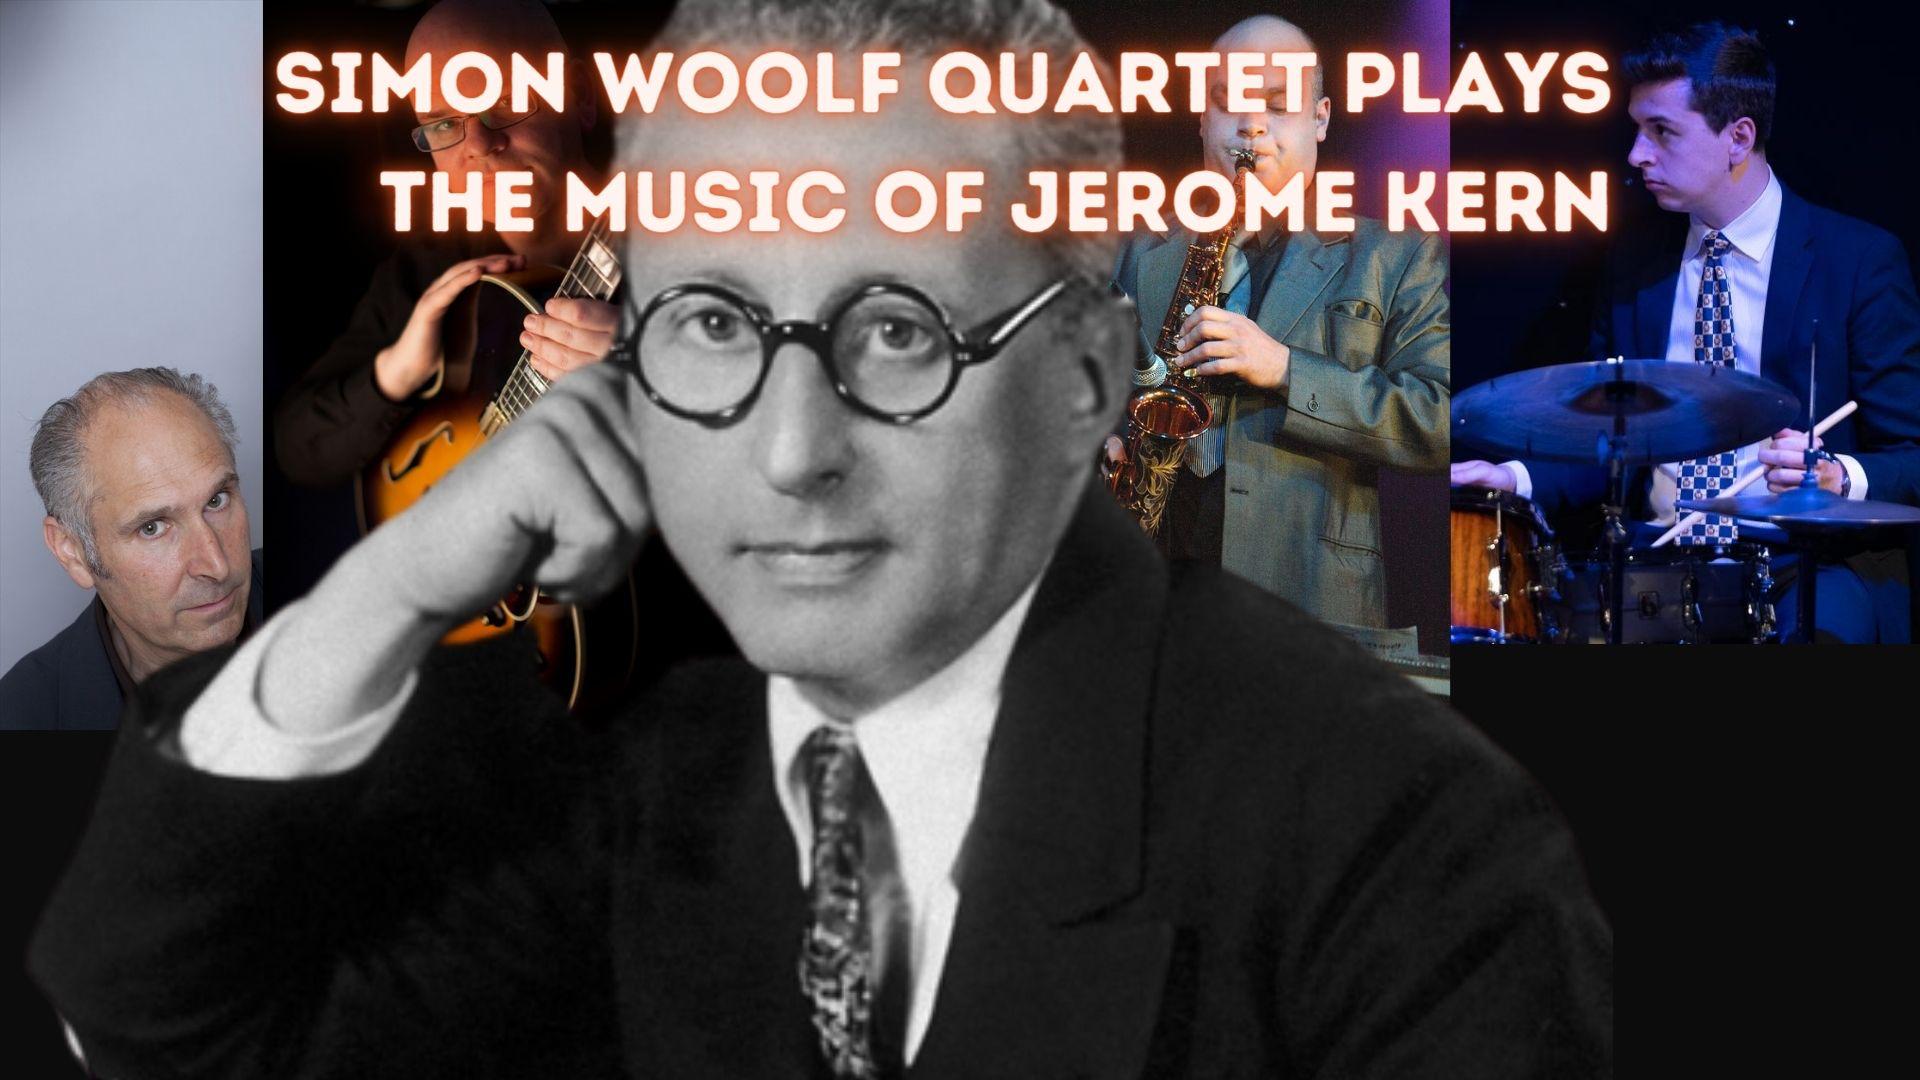 Simon Woolf Quartet plays the music of Jerome Kern - Live Broadcast